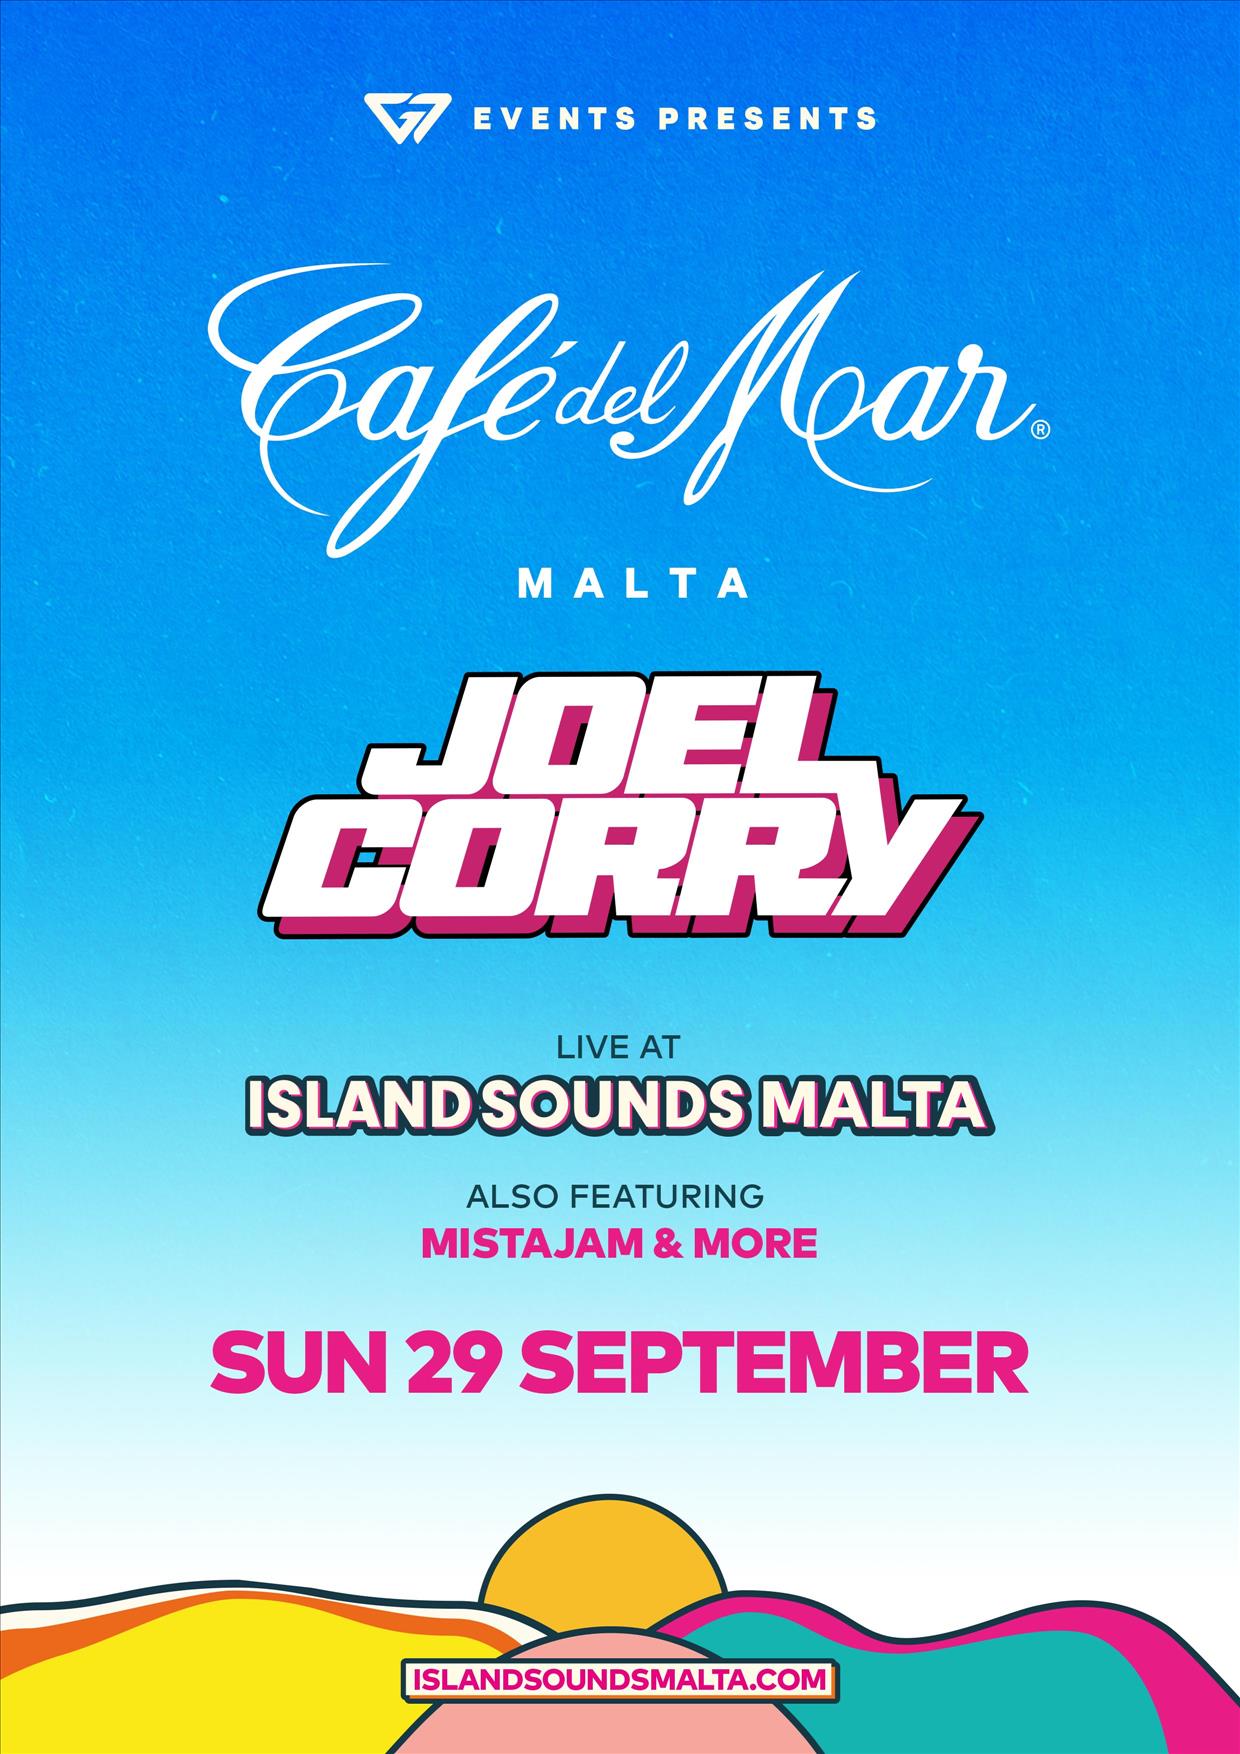 G7 Events - Island Sounds Malta at Cafe del Mar Ft. Joel Corry - Local Tickets